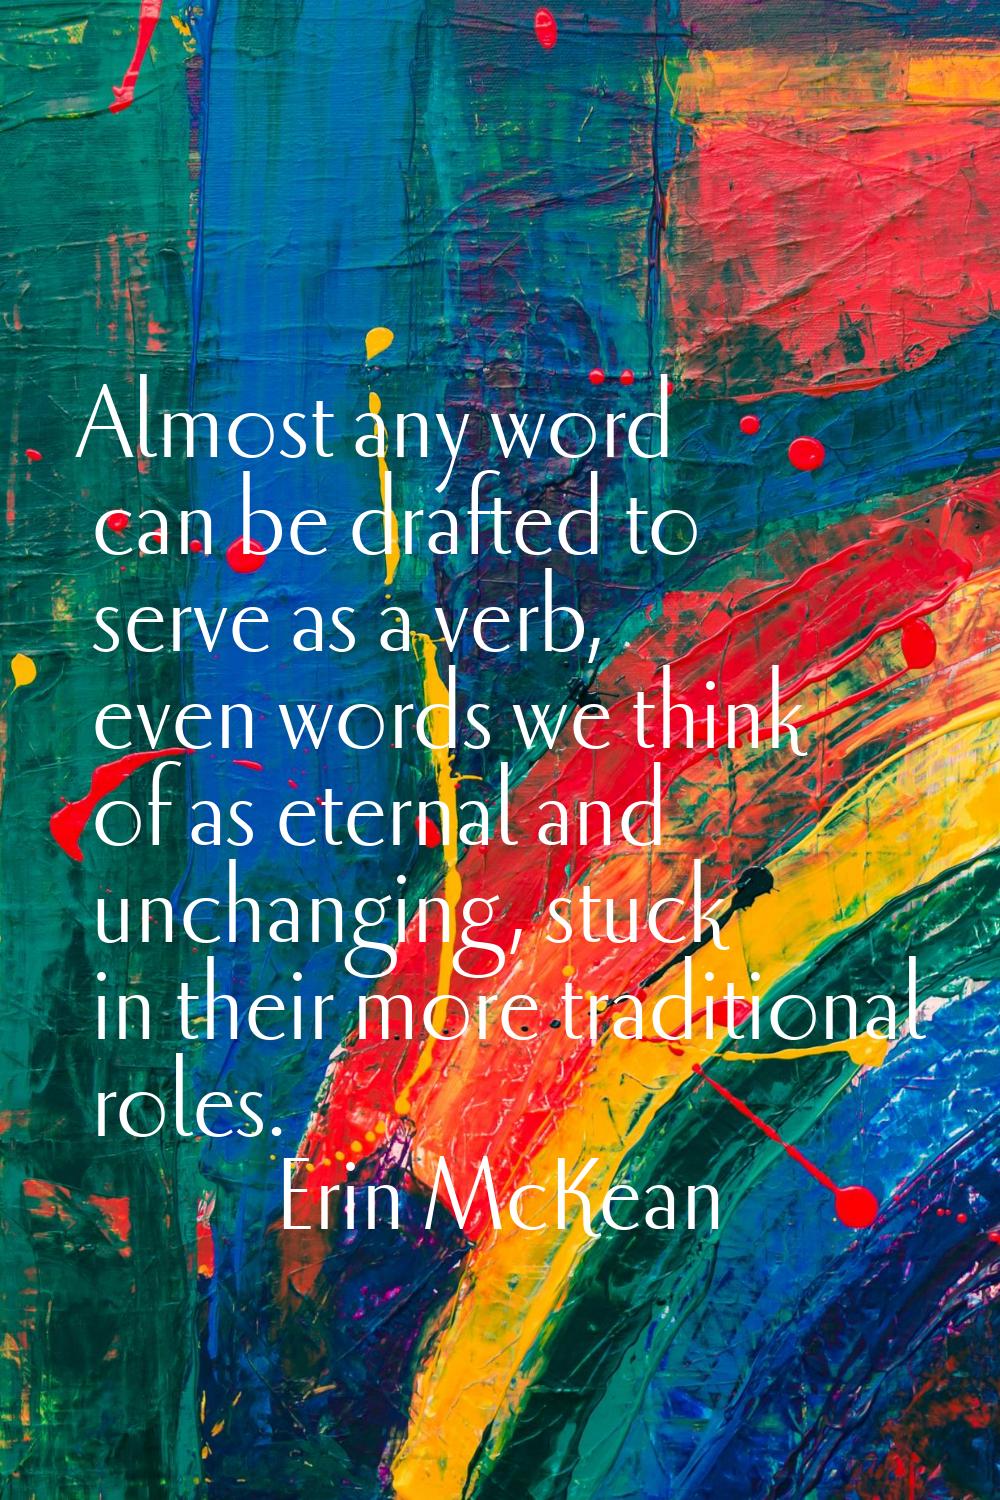 Almost any word can be drafted to serve as a verb, even words we think of as eternal and unchanging